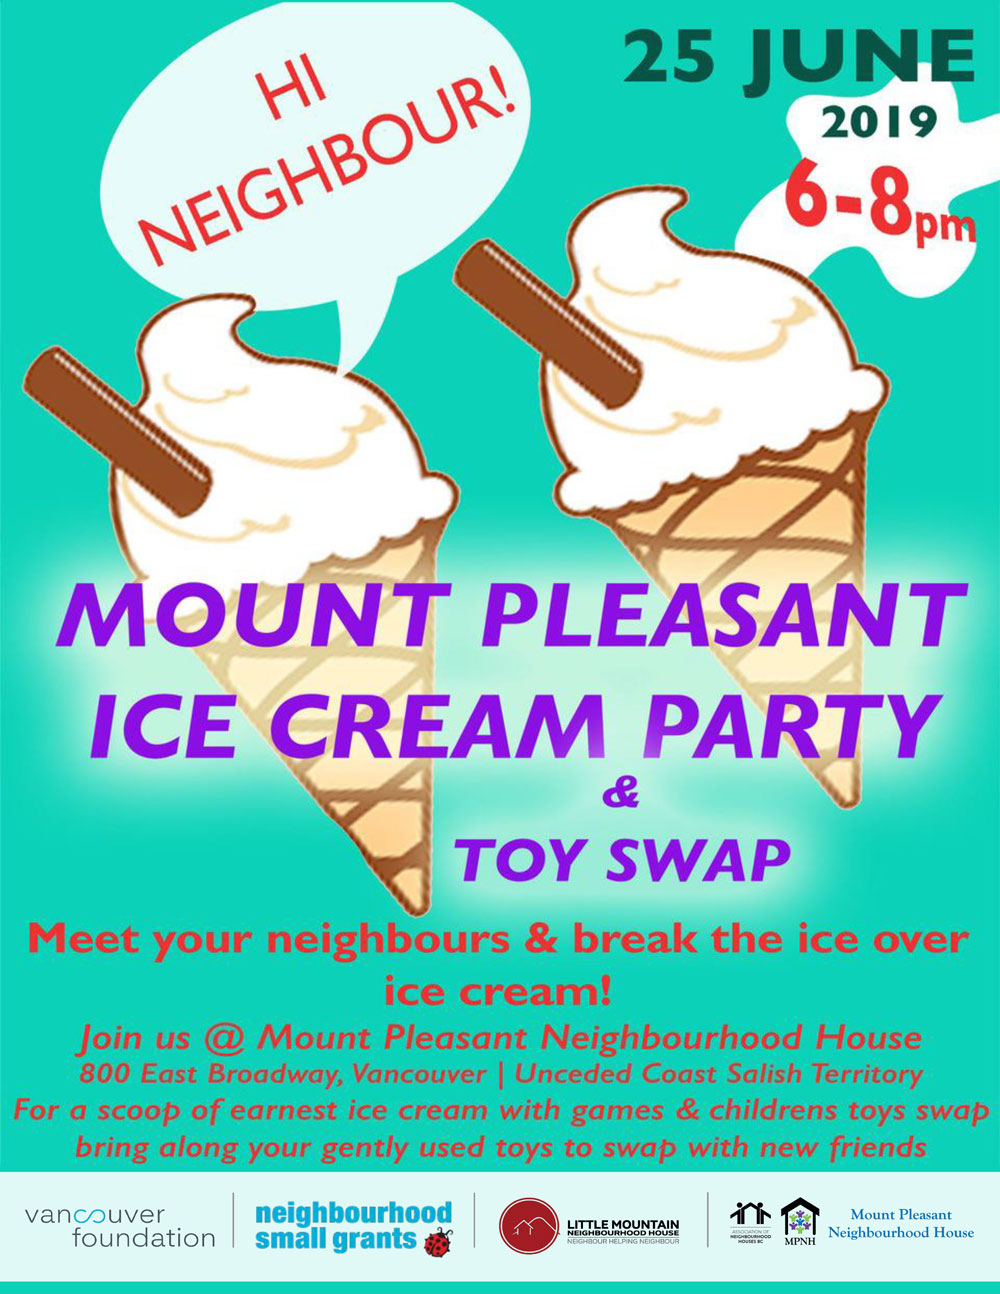 An image of the poster with event details, featuring a graphic of two ice cream cones. One of them has a speech bubble saying "Hi Neighbour!"